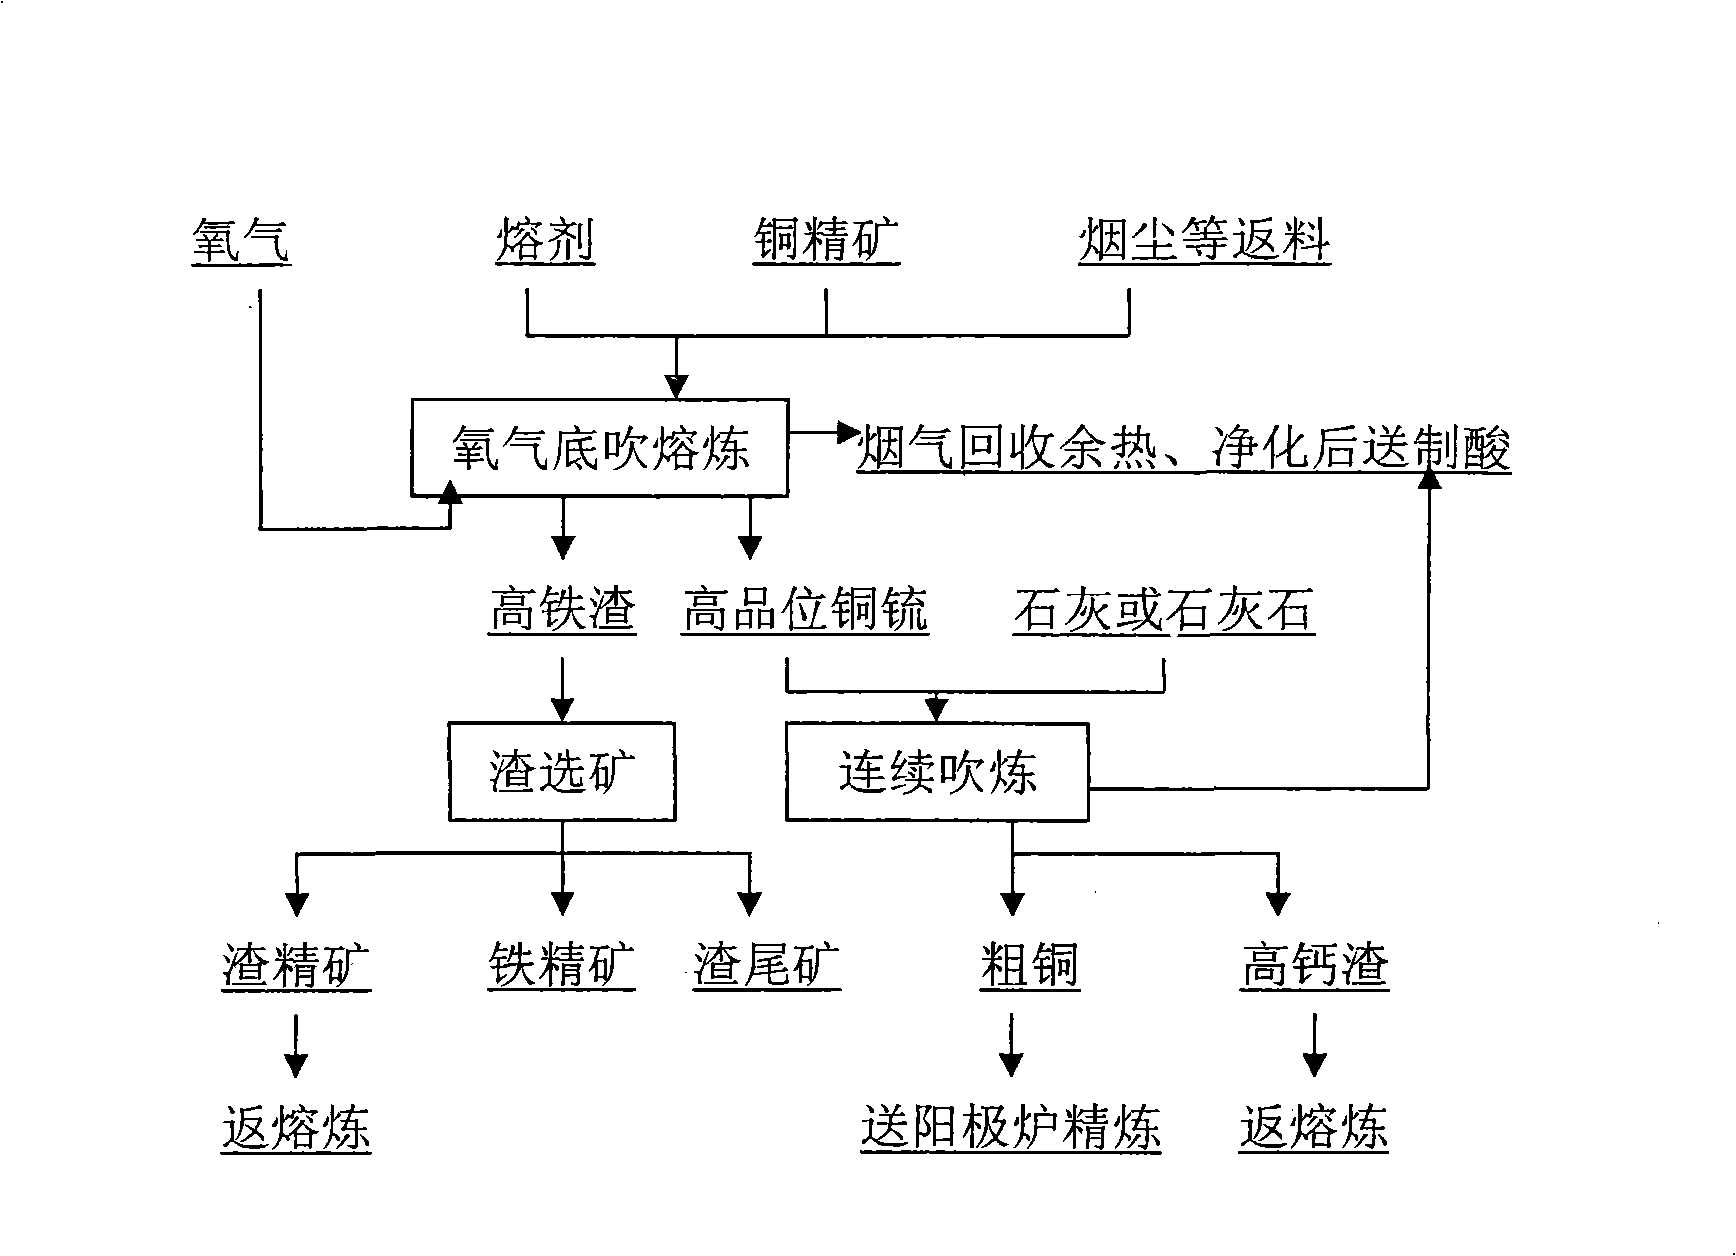 Process of oxygen bottom blowing continuous copper smelting